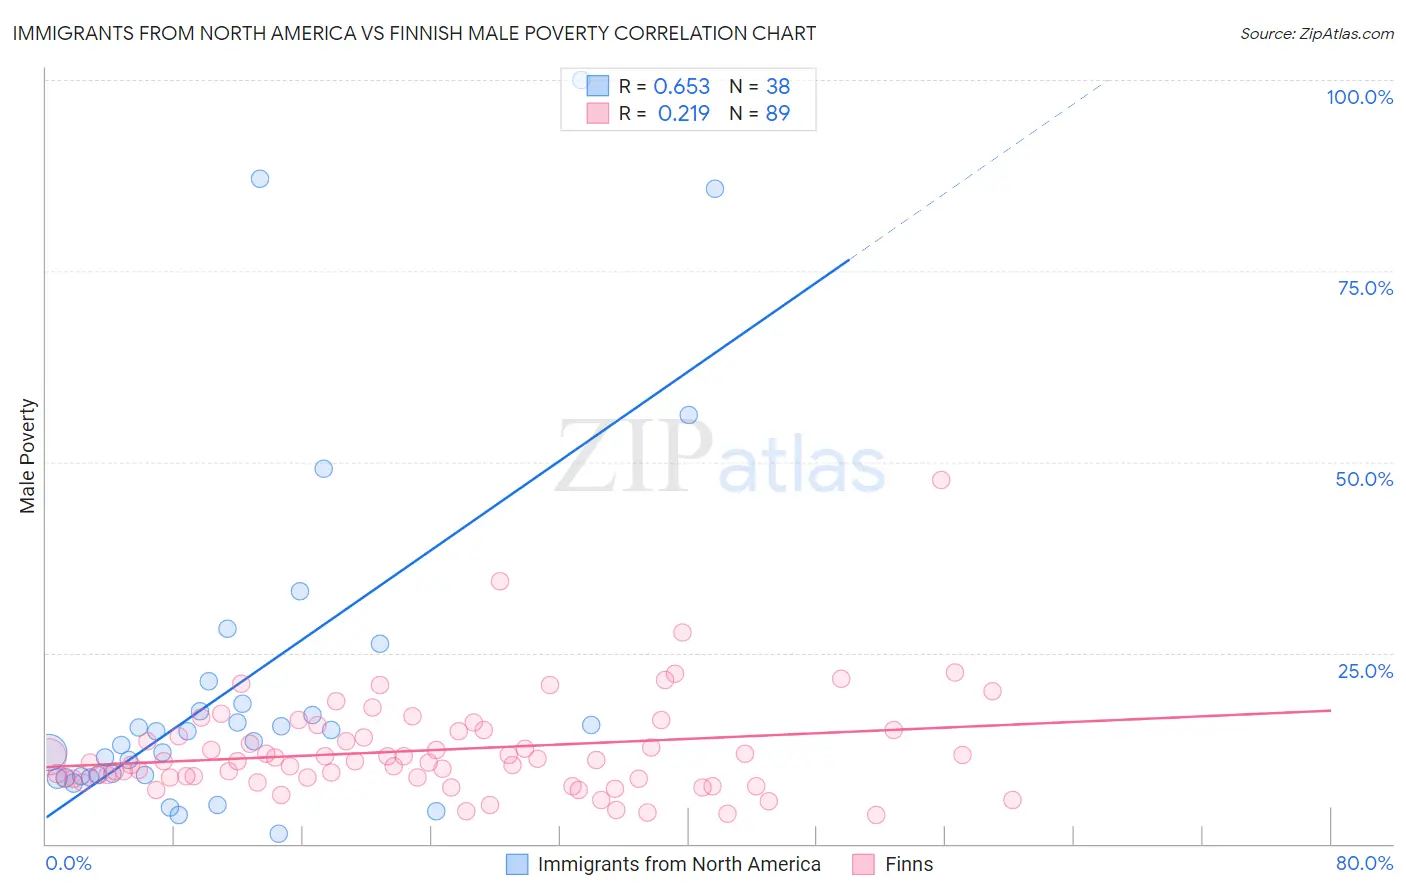 Immigrants from North America vs Finnish Male Poverty